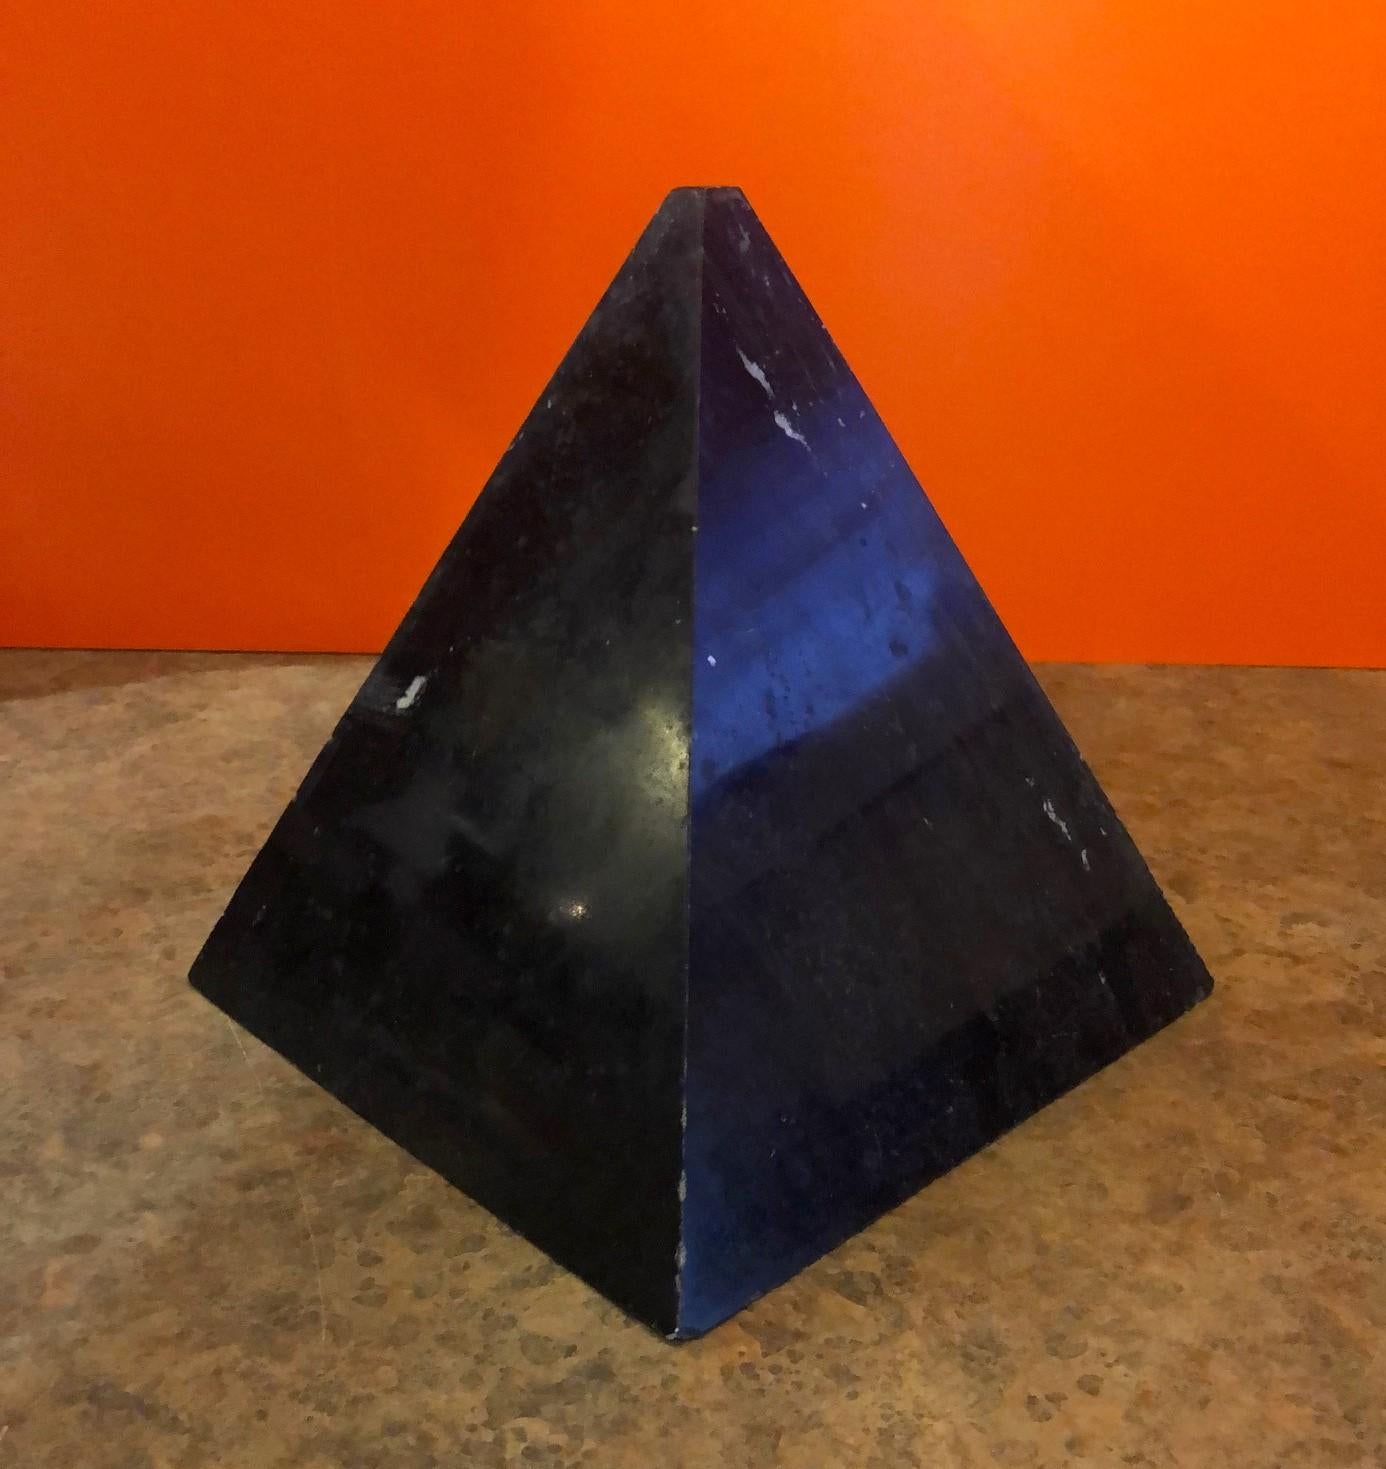 Beautiful large black marble decorative pyramid, circa 1970s. The base of the pyramid is 9.75